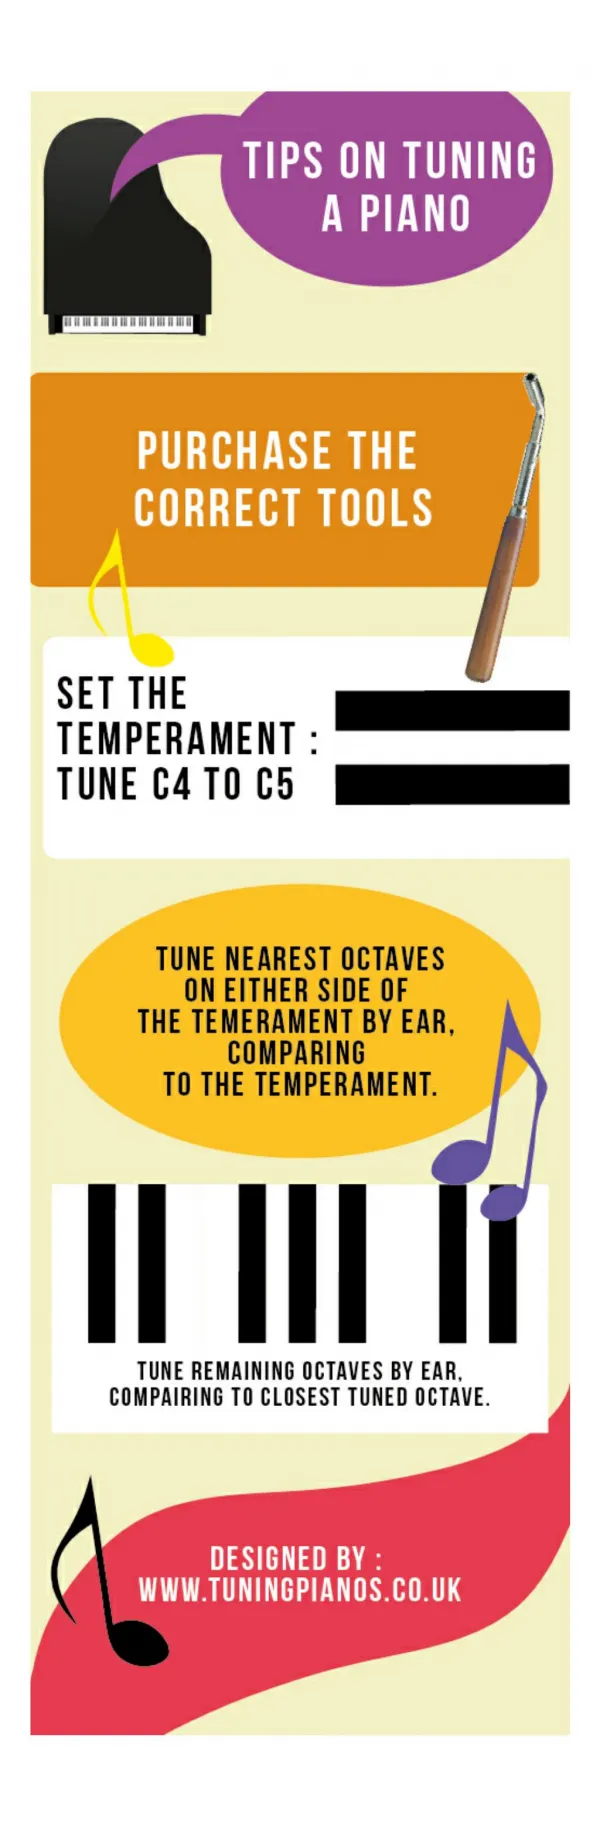 Tips on Tuning a Piano